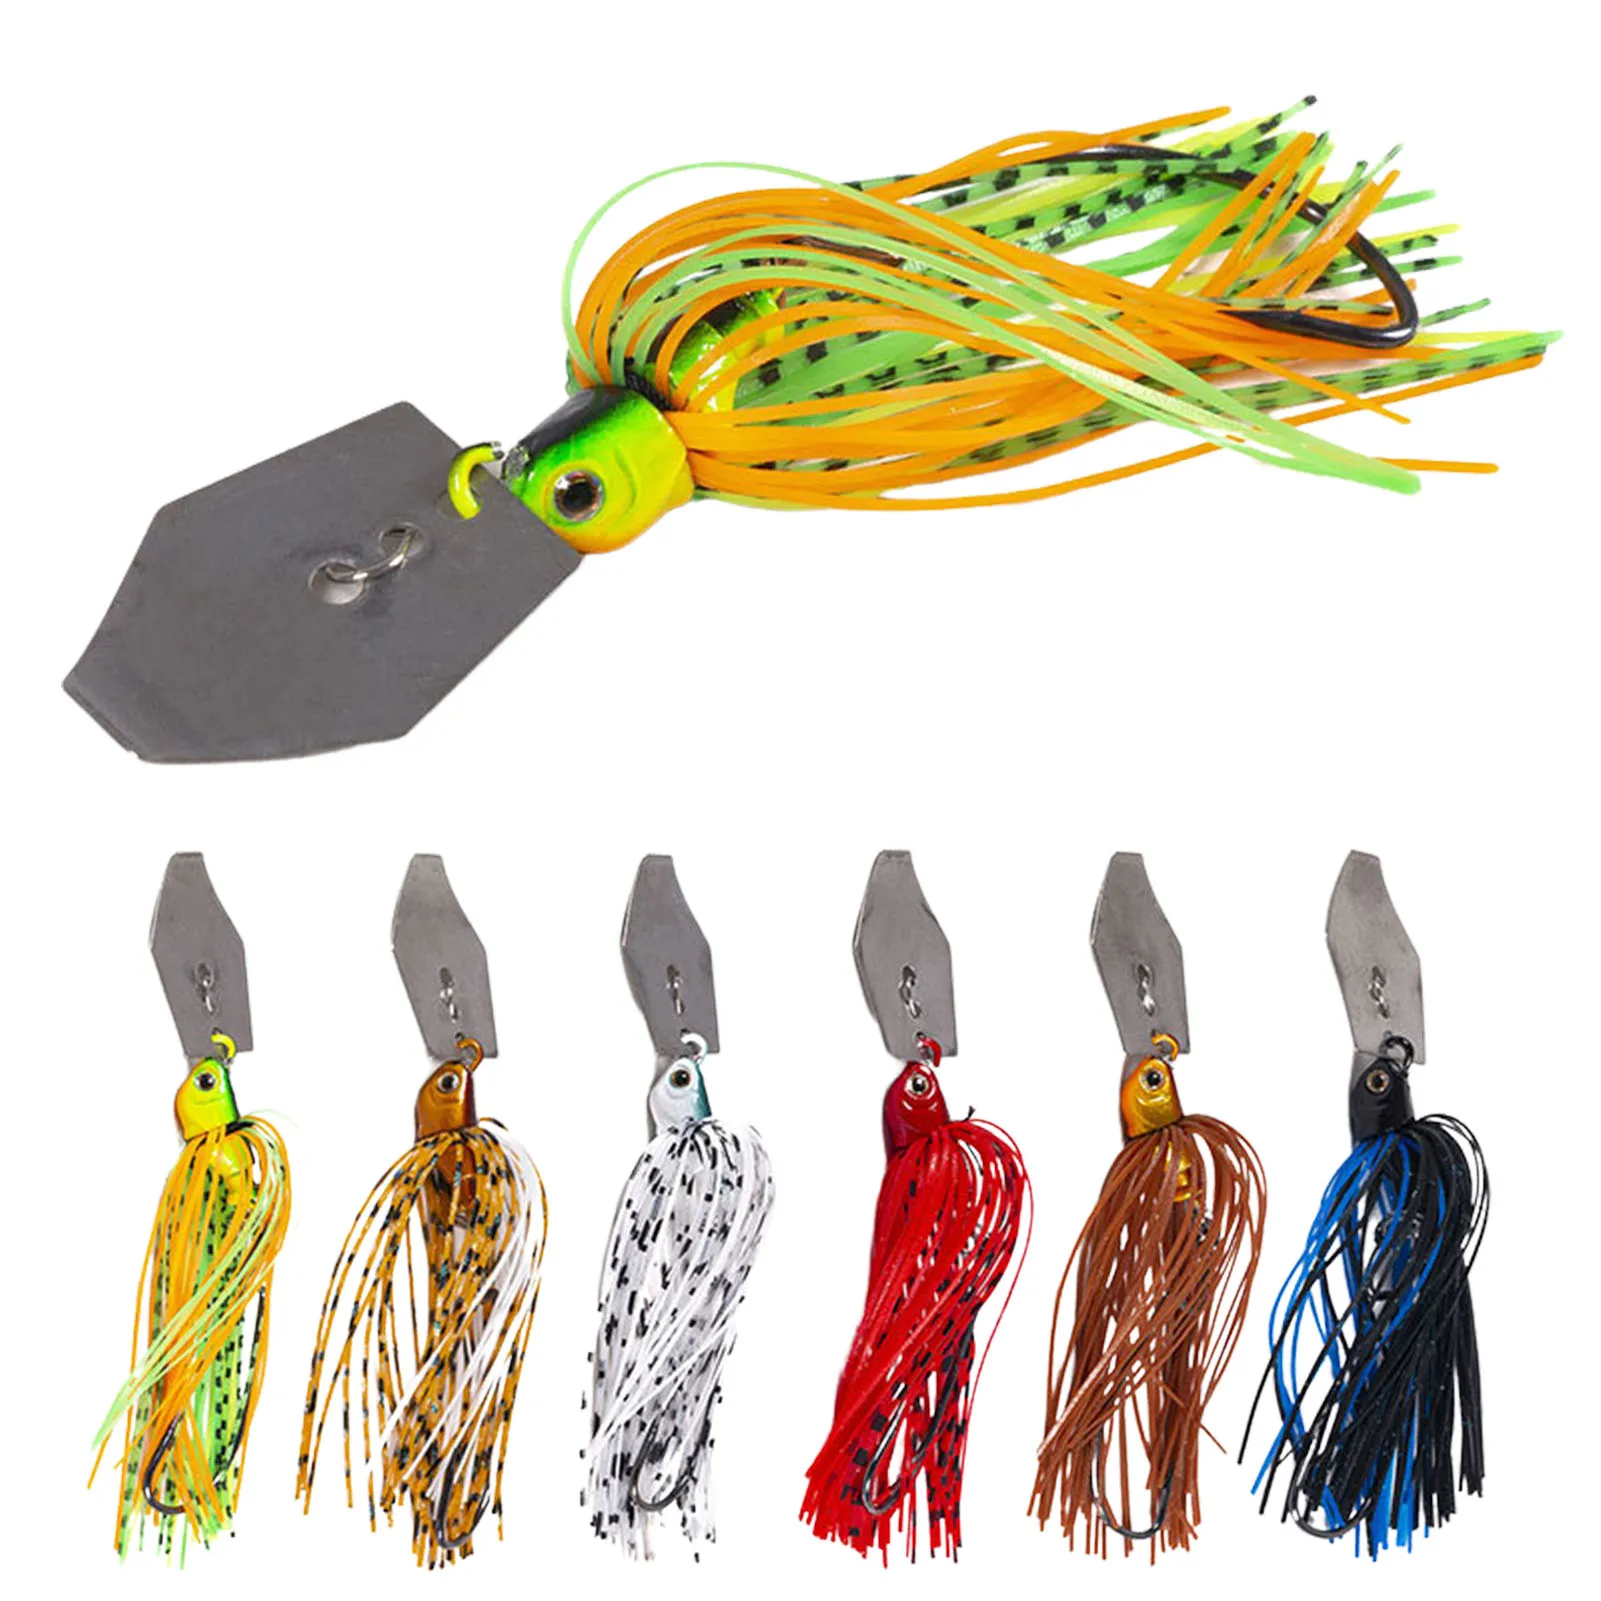 10cm 6pcs Chatter Bait Spinner Bait Weedless Fishing Lure Buzzbait Wobbler Chatterbait for Bass Pike Walleye Fish